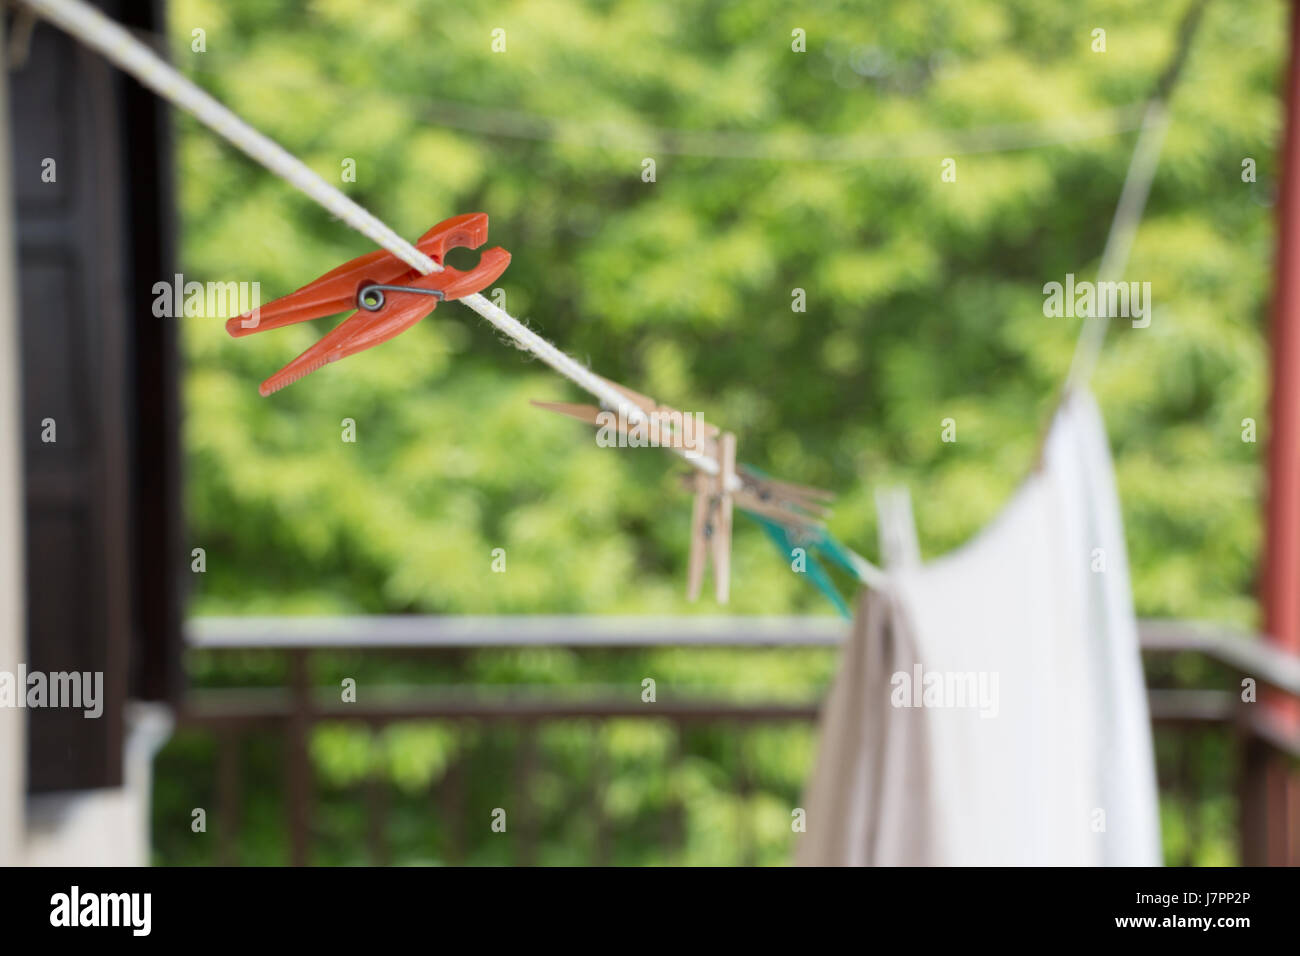 Closeup of a plastic peg on a washing line with clothespins and clothes blurred background. Stock Photo